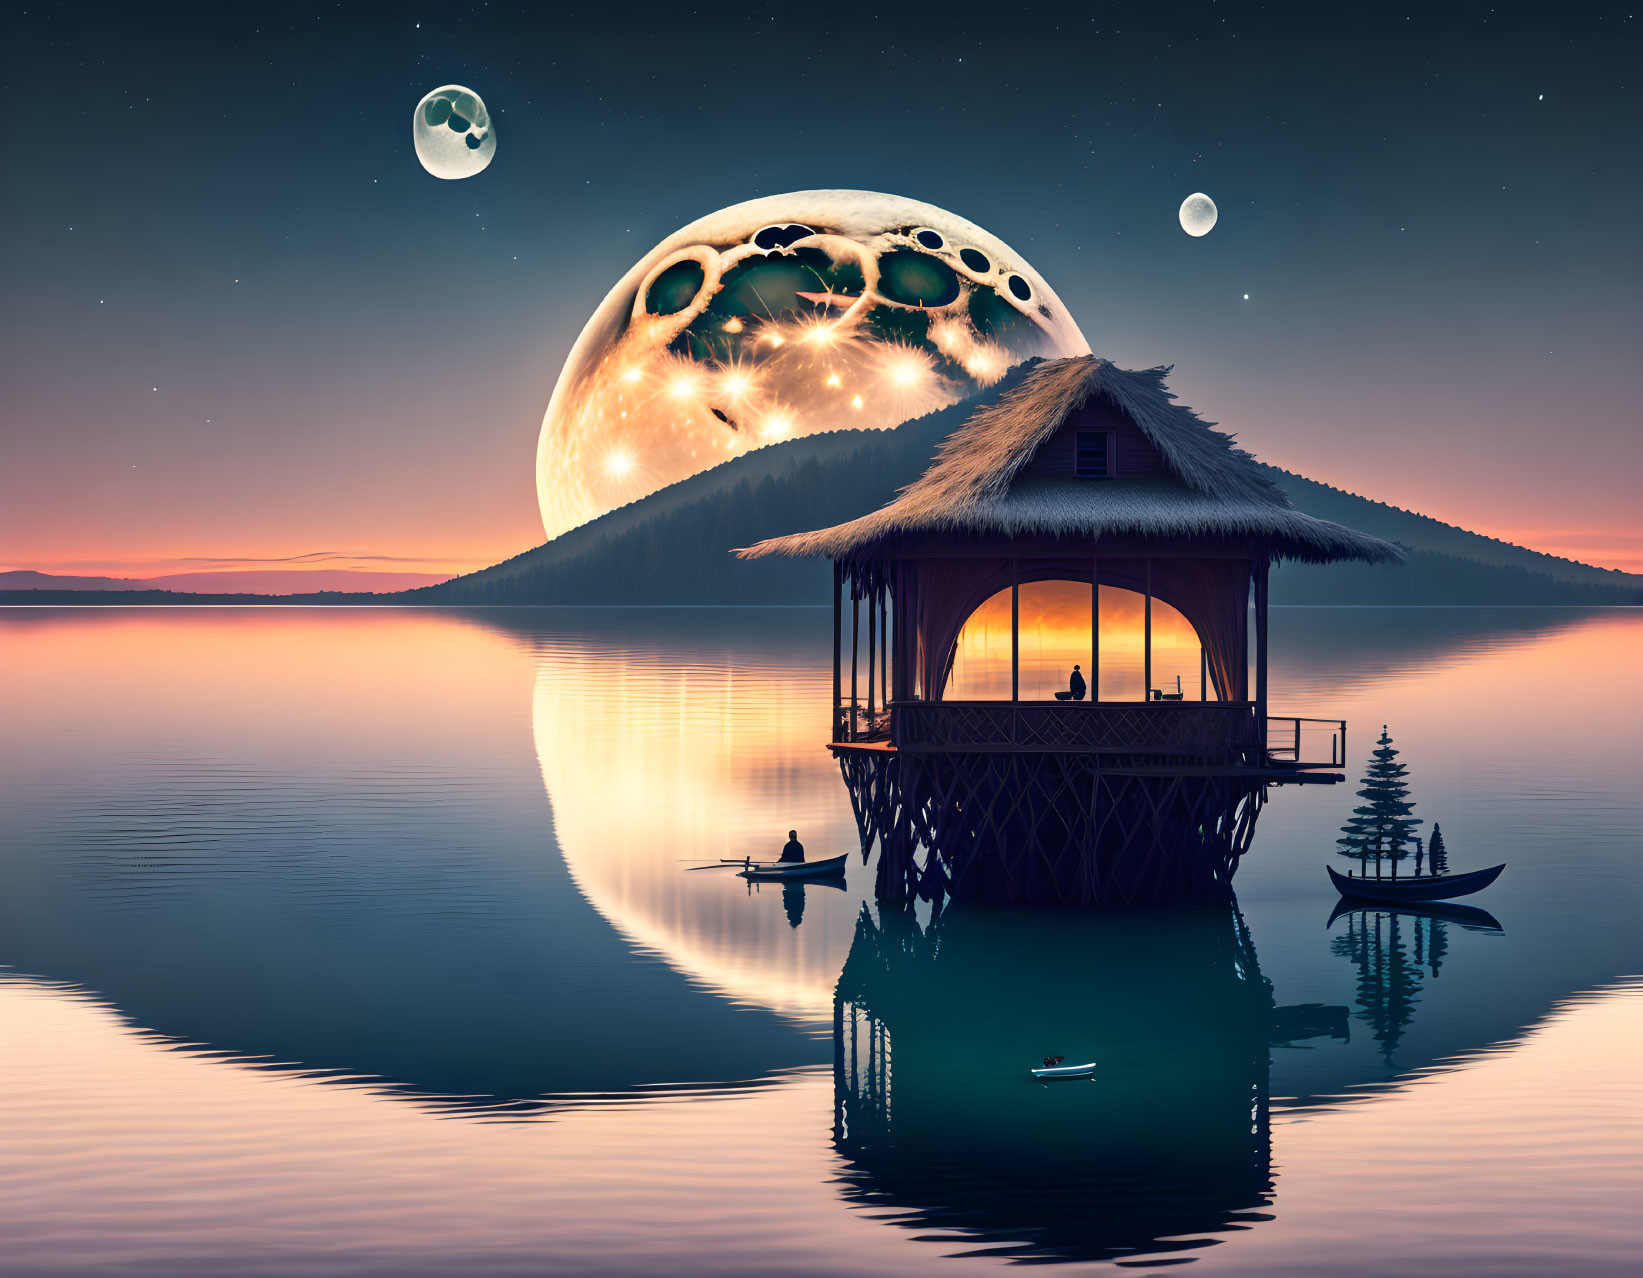 Tranquil lakeside twilight with moon, canoe, and stilt house